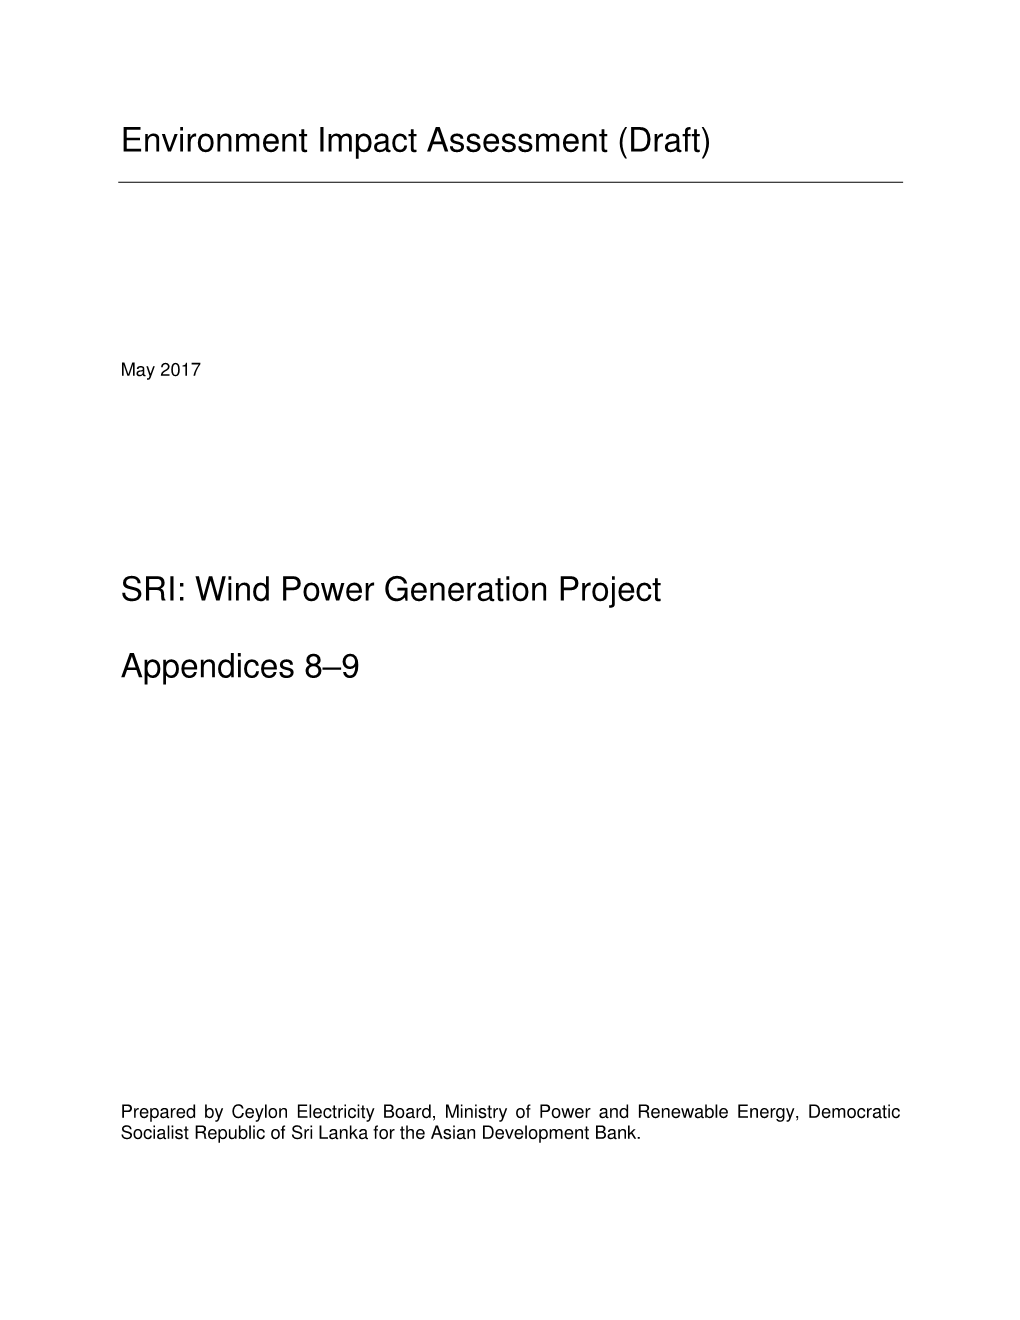 Wind Power Generation Project Appendices